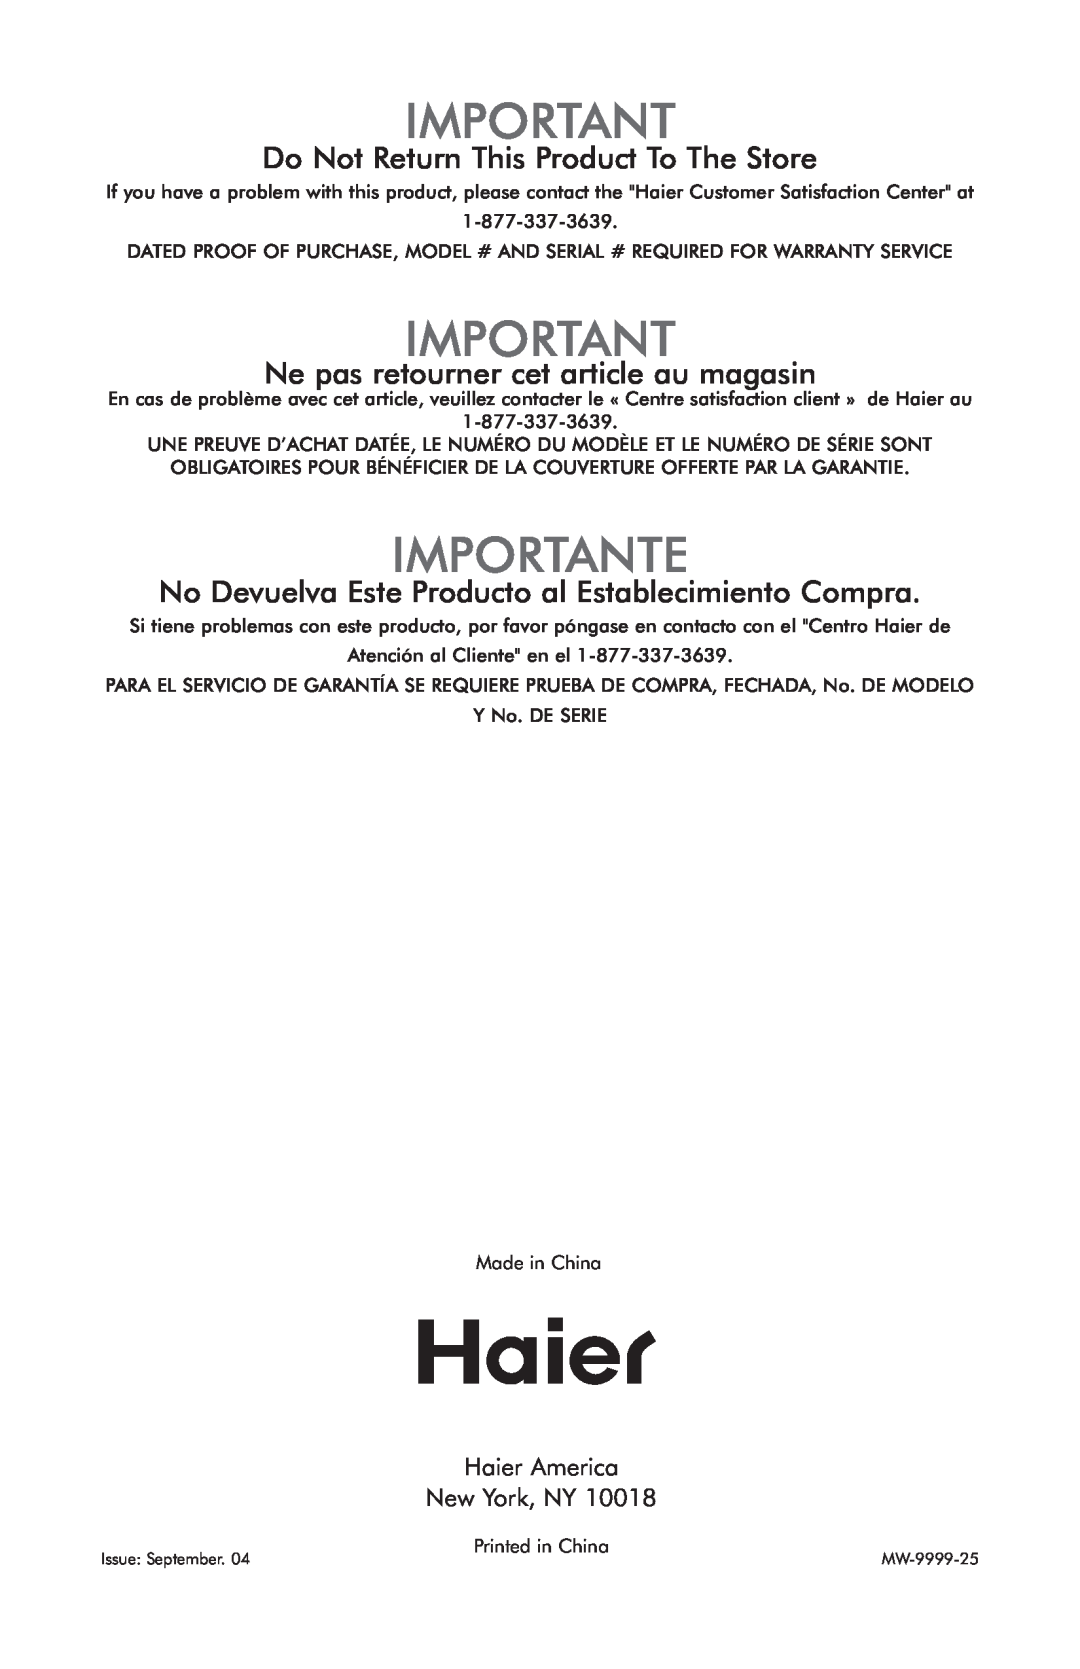 Haier MWG7047TW / B Importante, Do Not Return This Product To The Store, Ne pas retourner cet article au magasin 